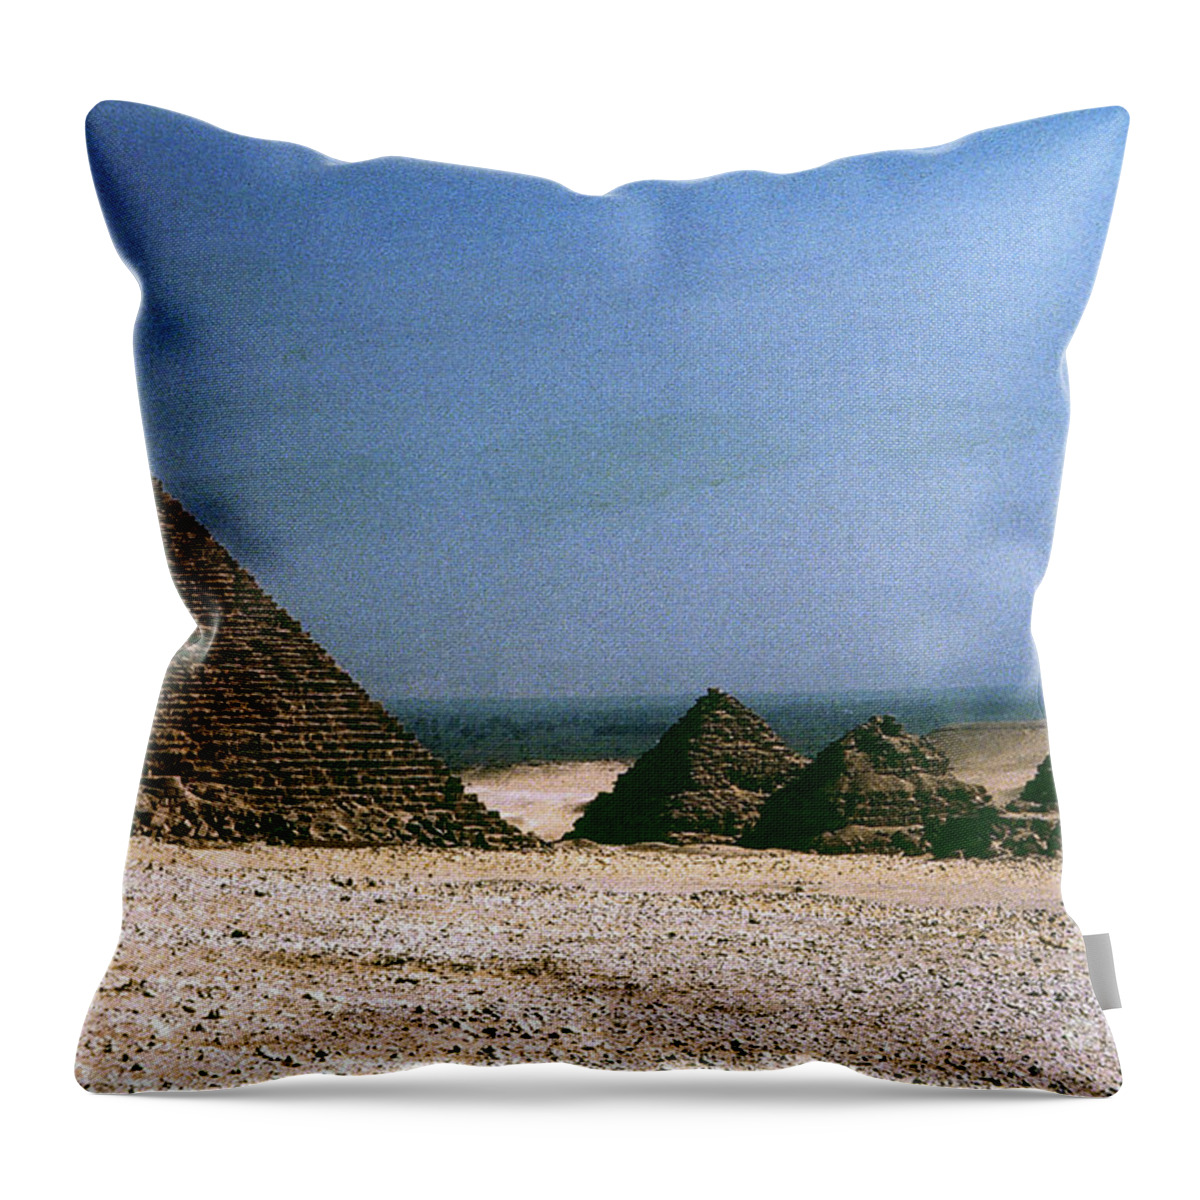 4th Dynasty Throw Pillow featuring the photograph Pyramid Of Mykerinos by Granger